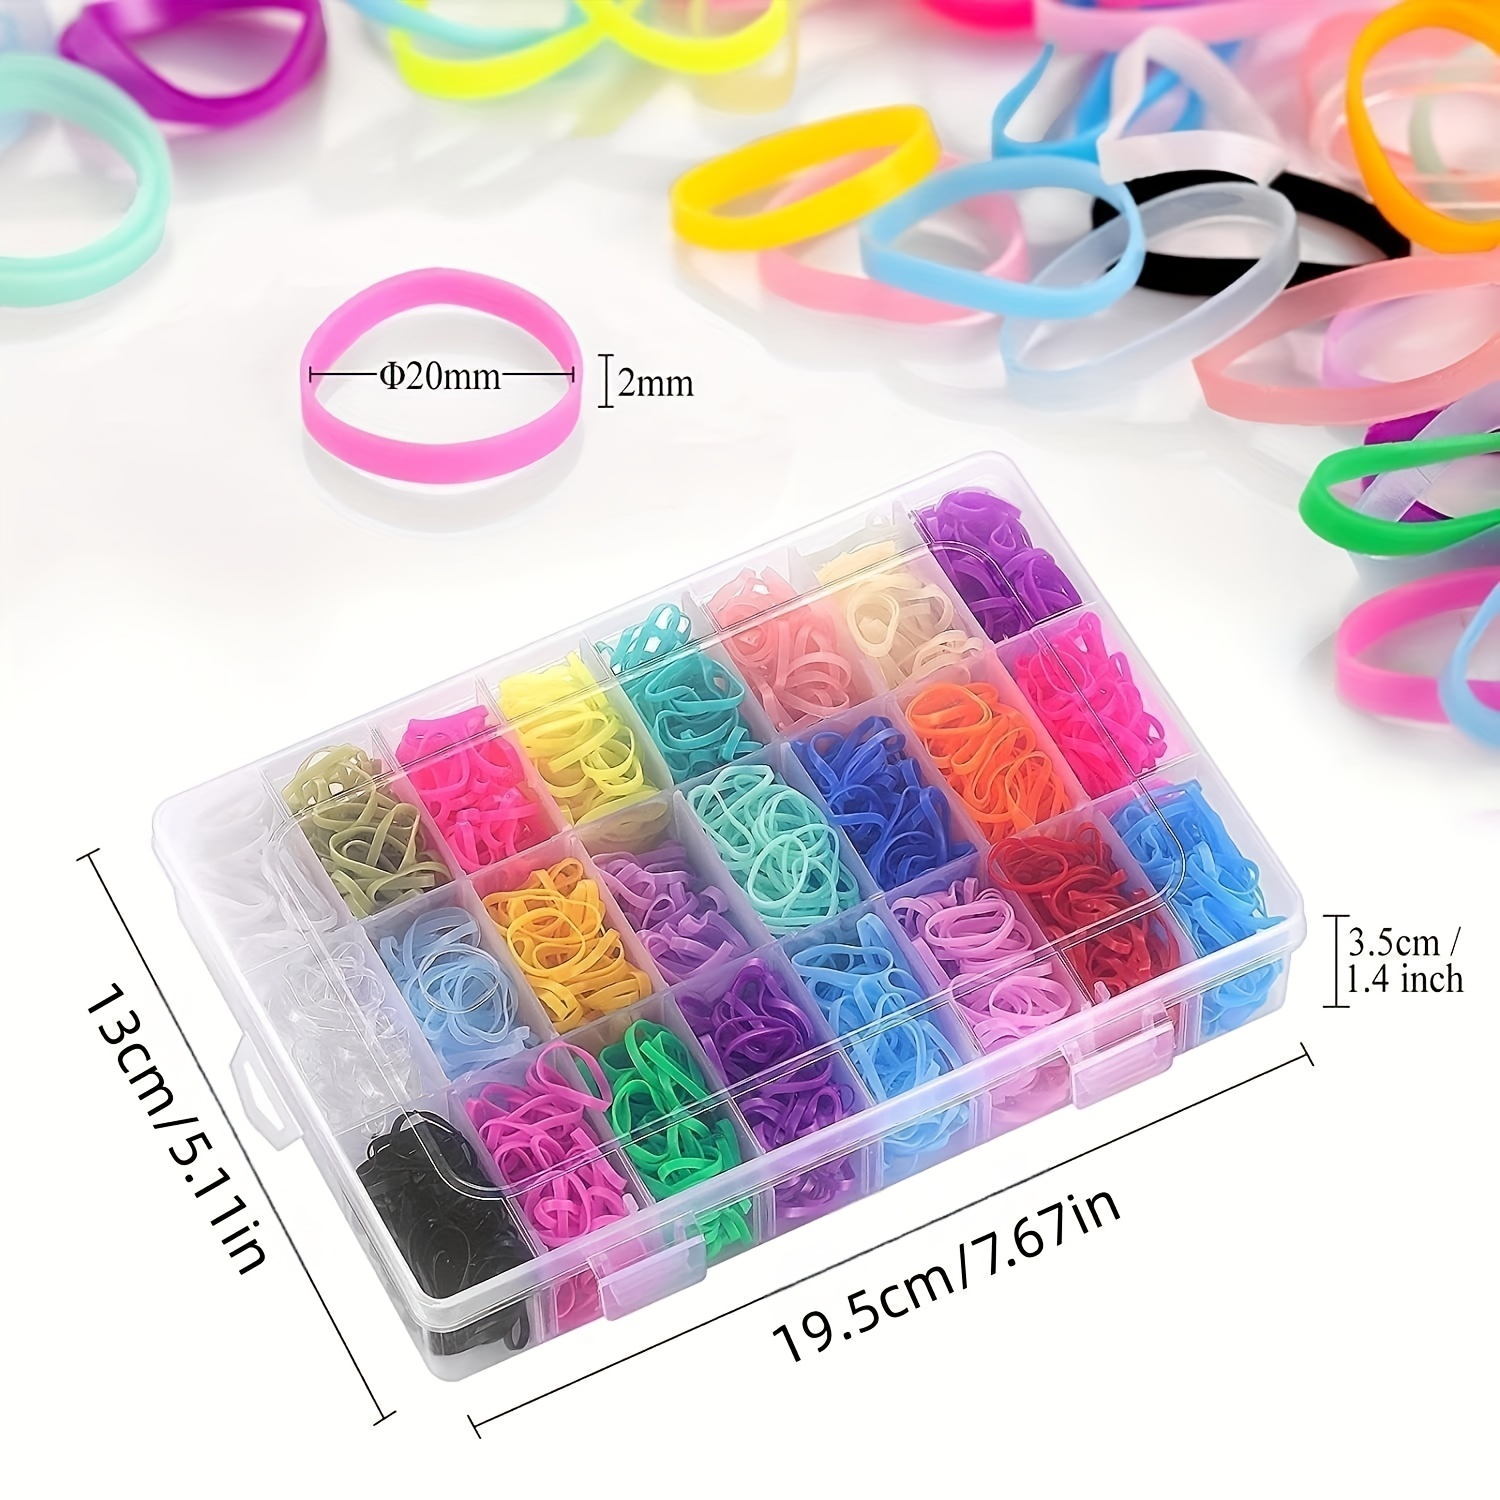 Temu 1500 Pcs/Box Colorful Rubber Bands, Small Elastic Hair Ties, Headbands, Scrunchies with Organizer Box Colorful Hair Ties for Girls, Mini Kids Hair